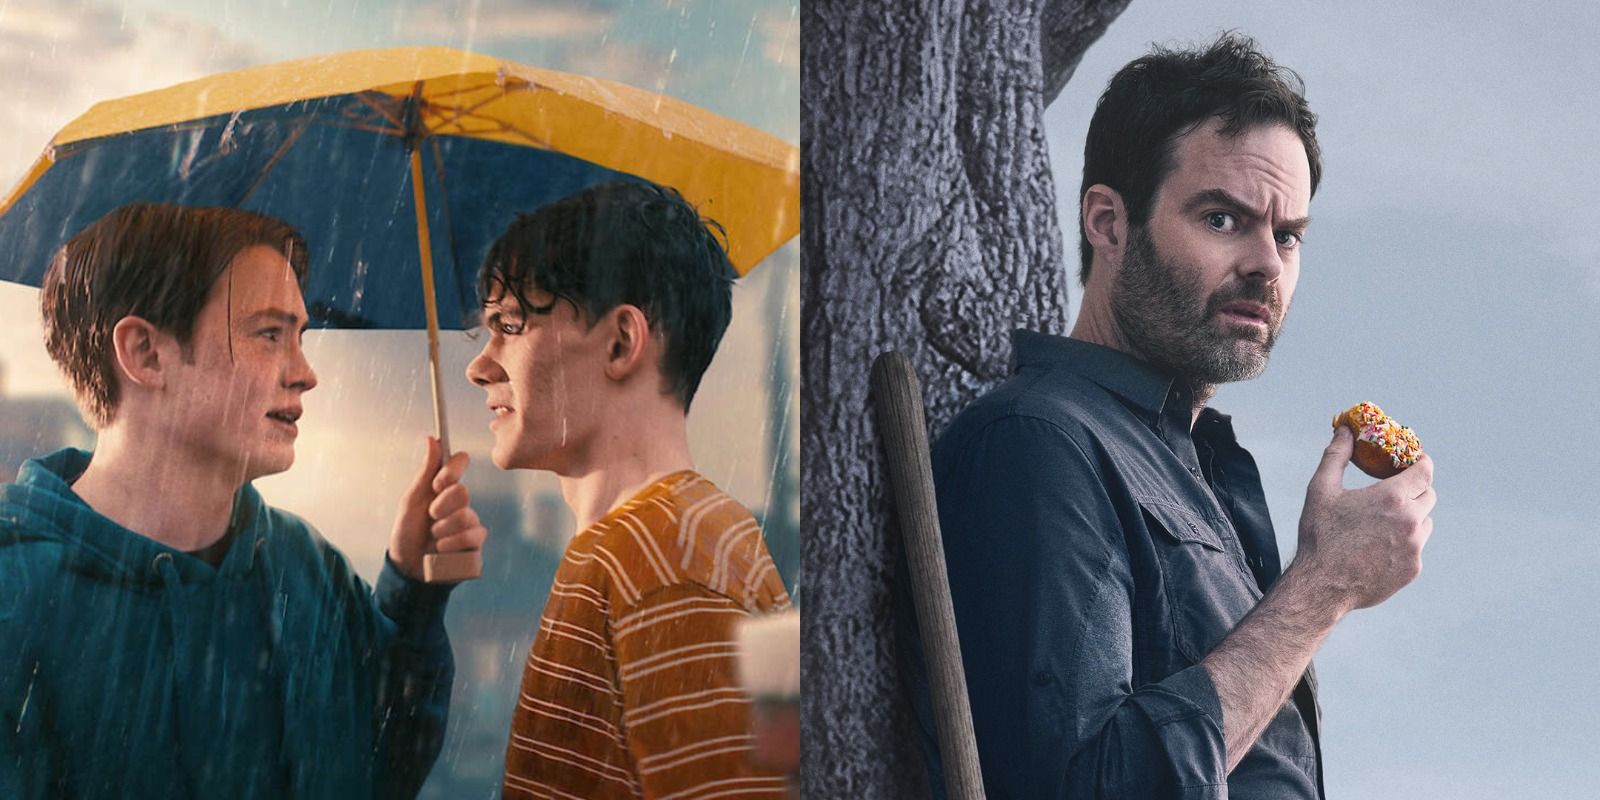 Charlie and Nick under an umbrella in Heartstopper & Bill Hader eating a doughnut in Barry